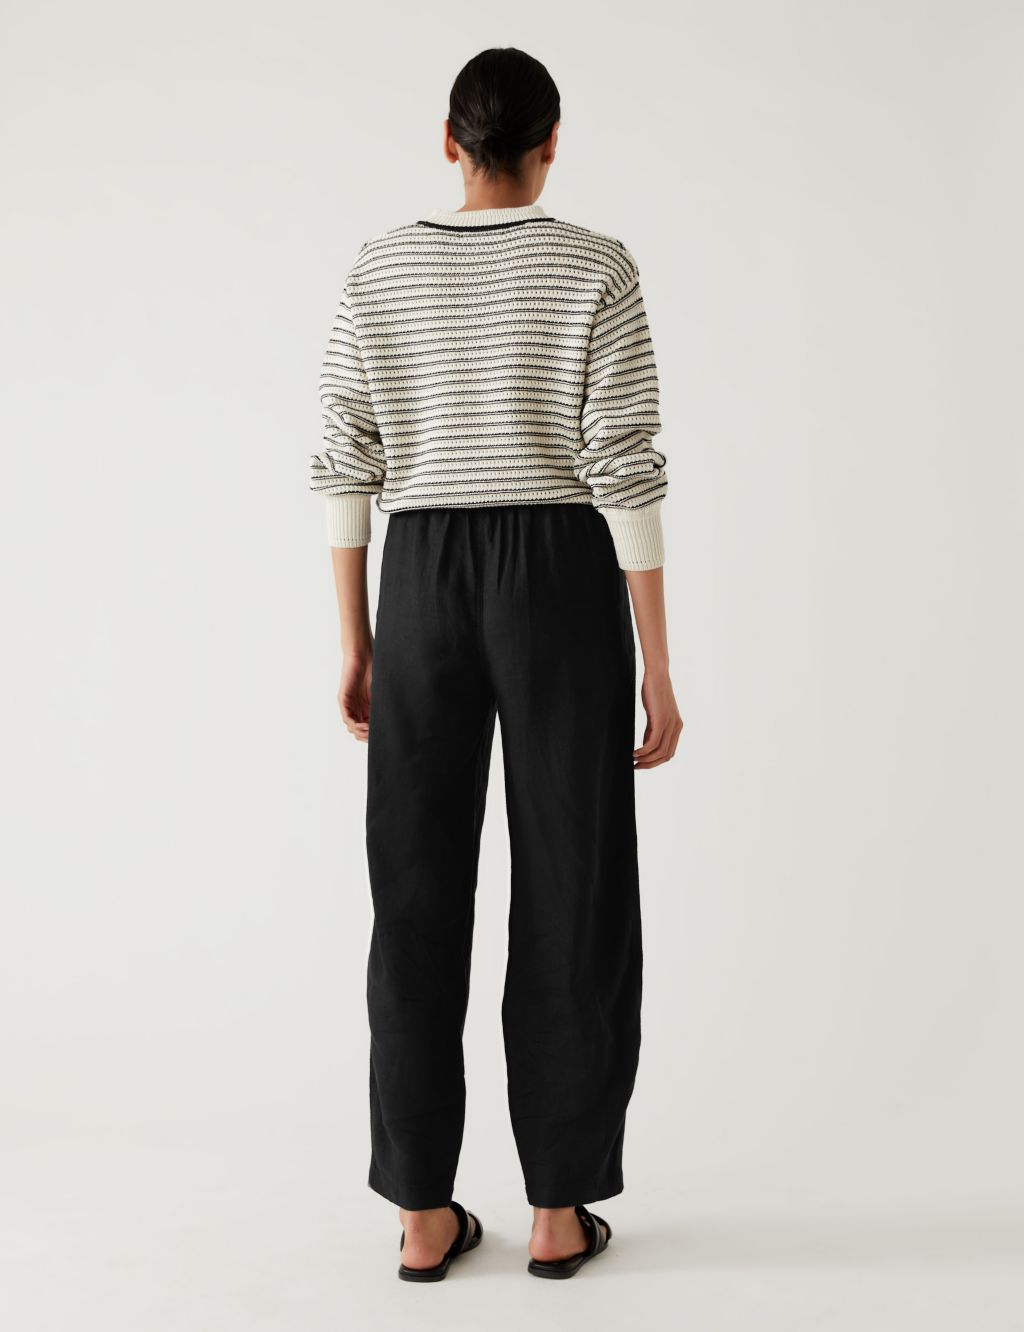 Pure Linen Printed Belted Balloon Trousers image 4